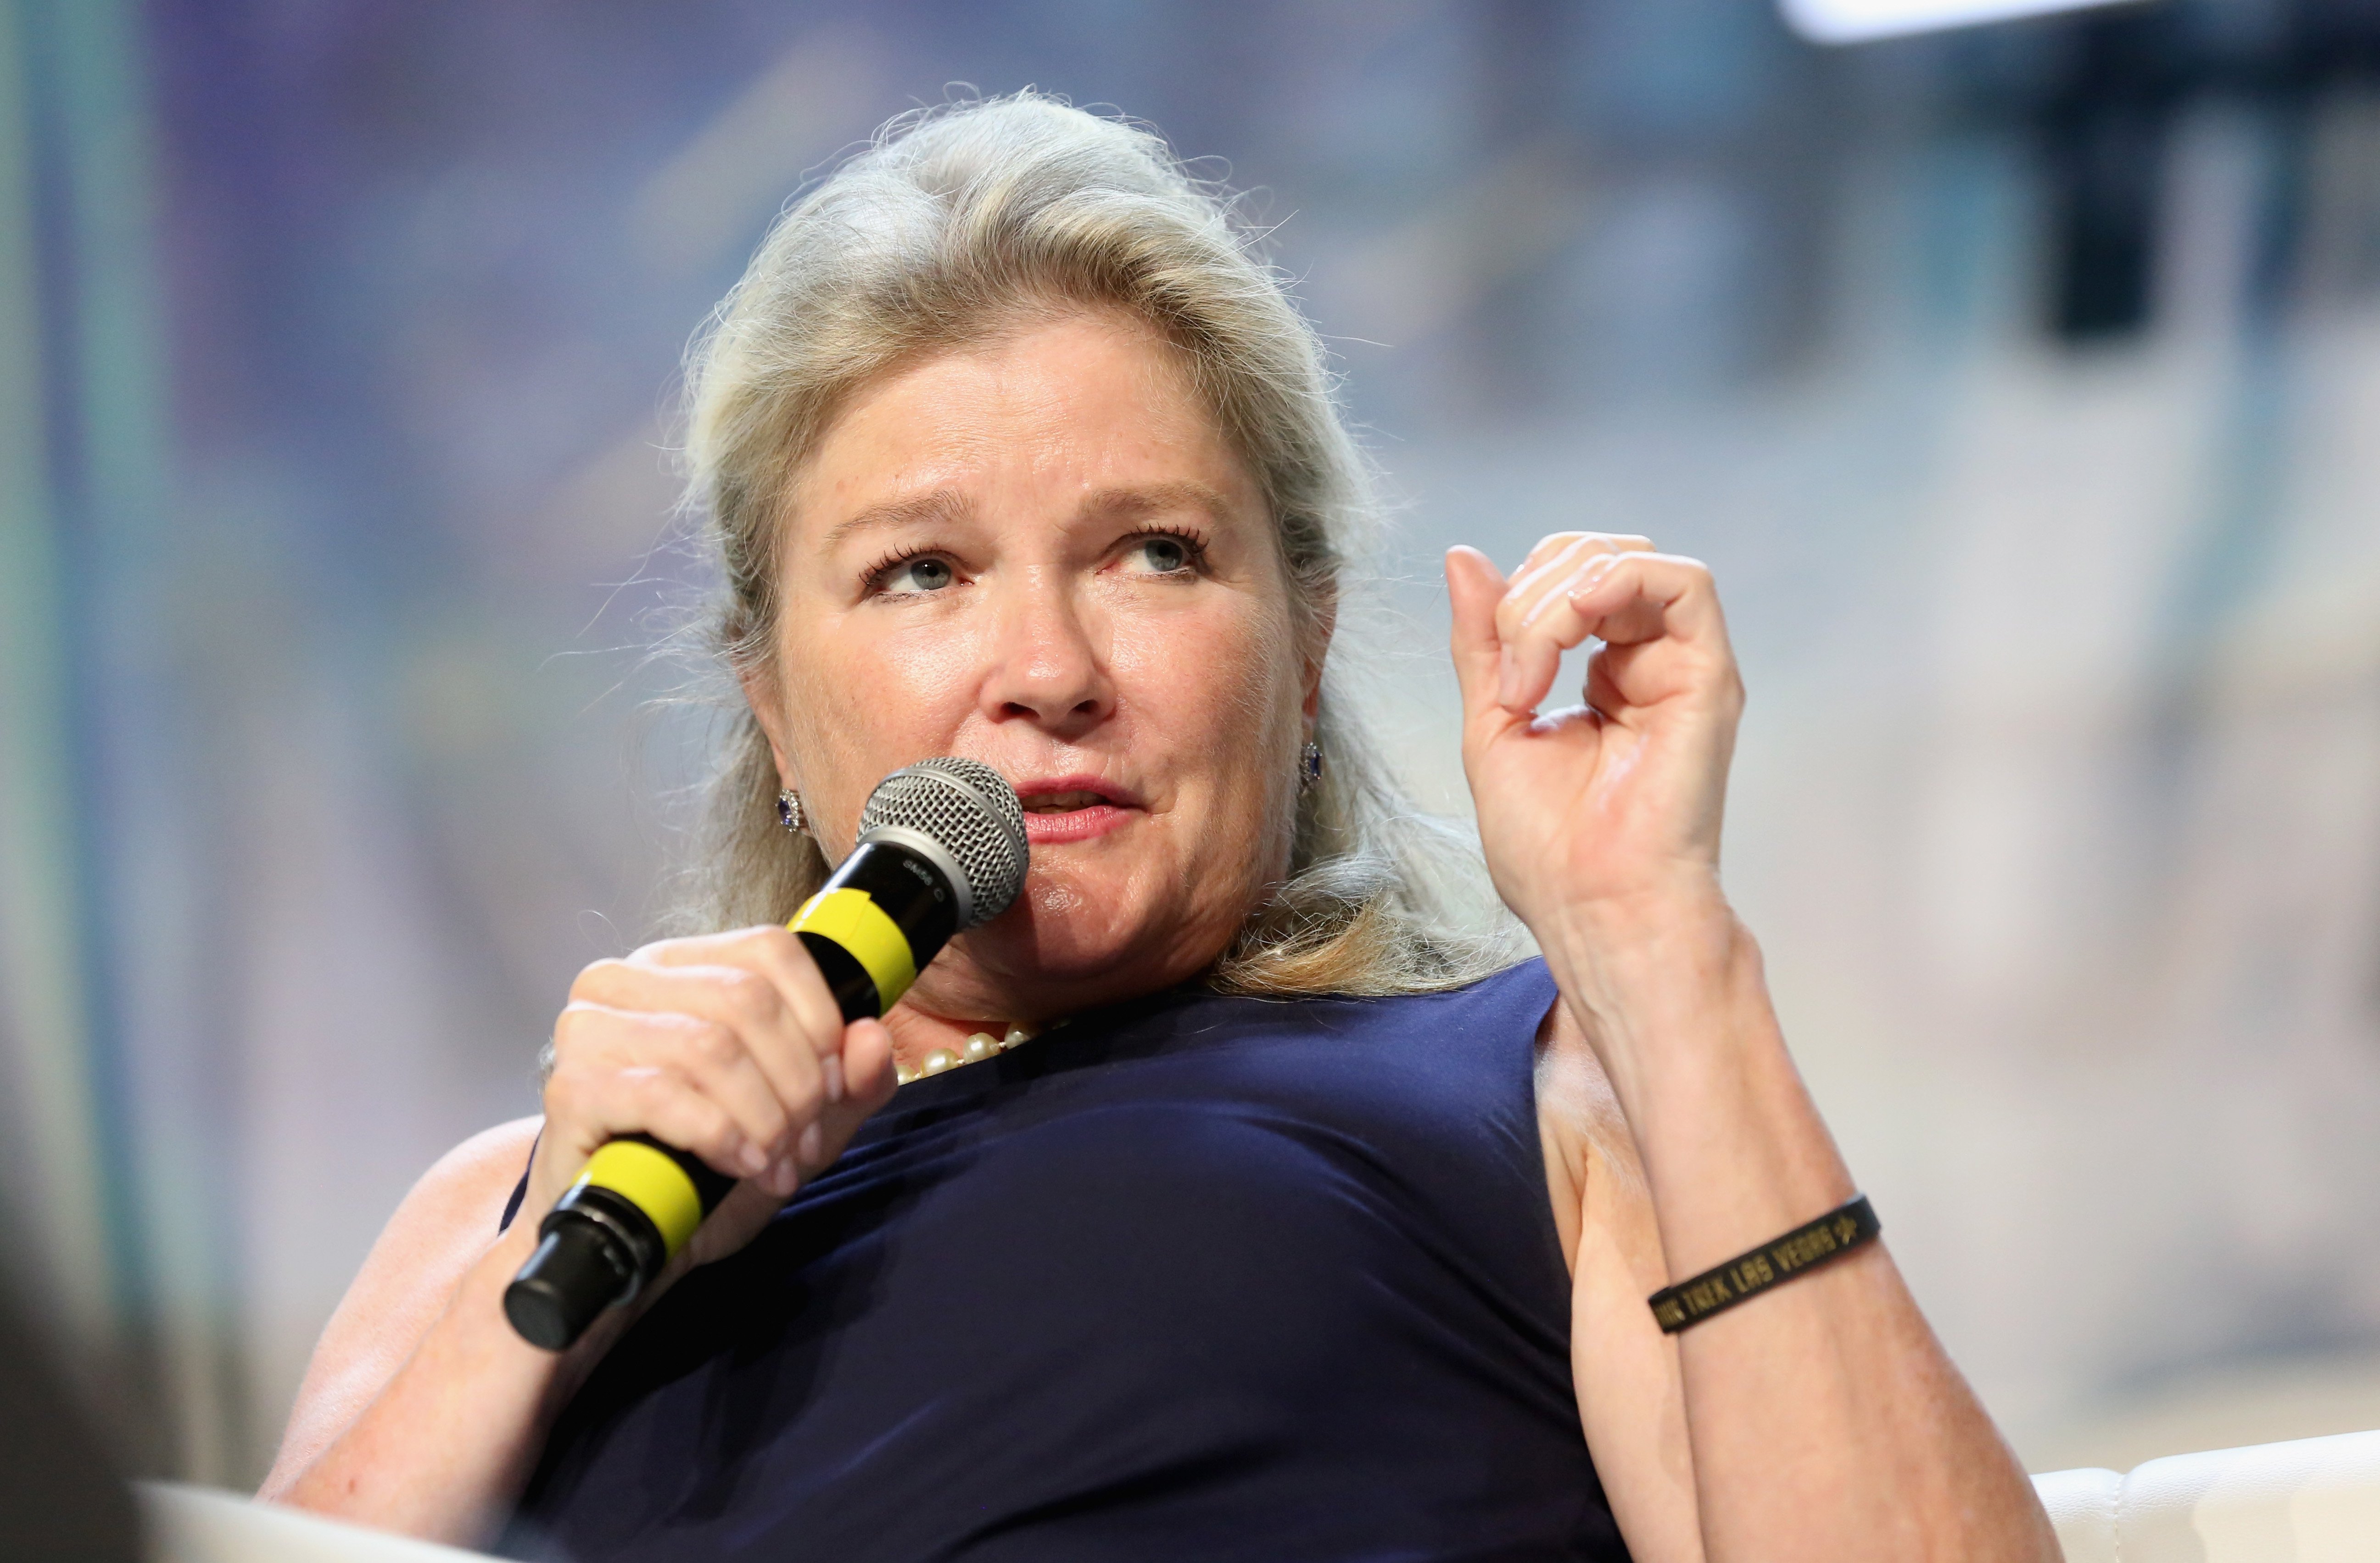 Kate Mulgrew on August 4, 2018 in Las Vegas, Nevada | Photo: Getty Images